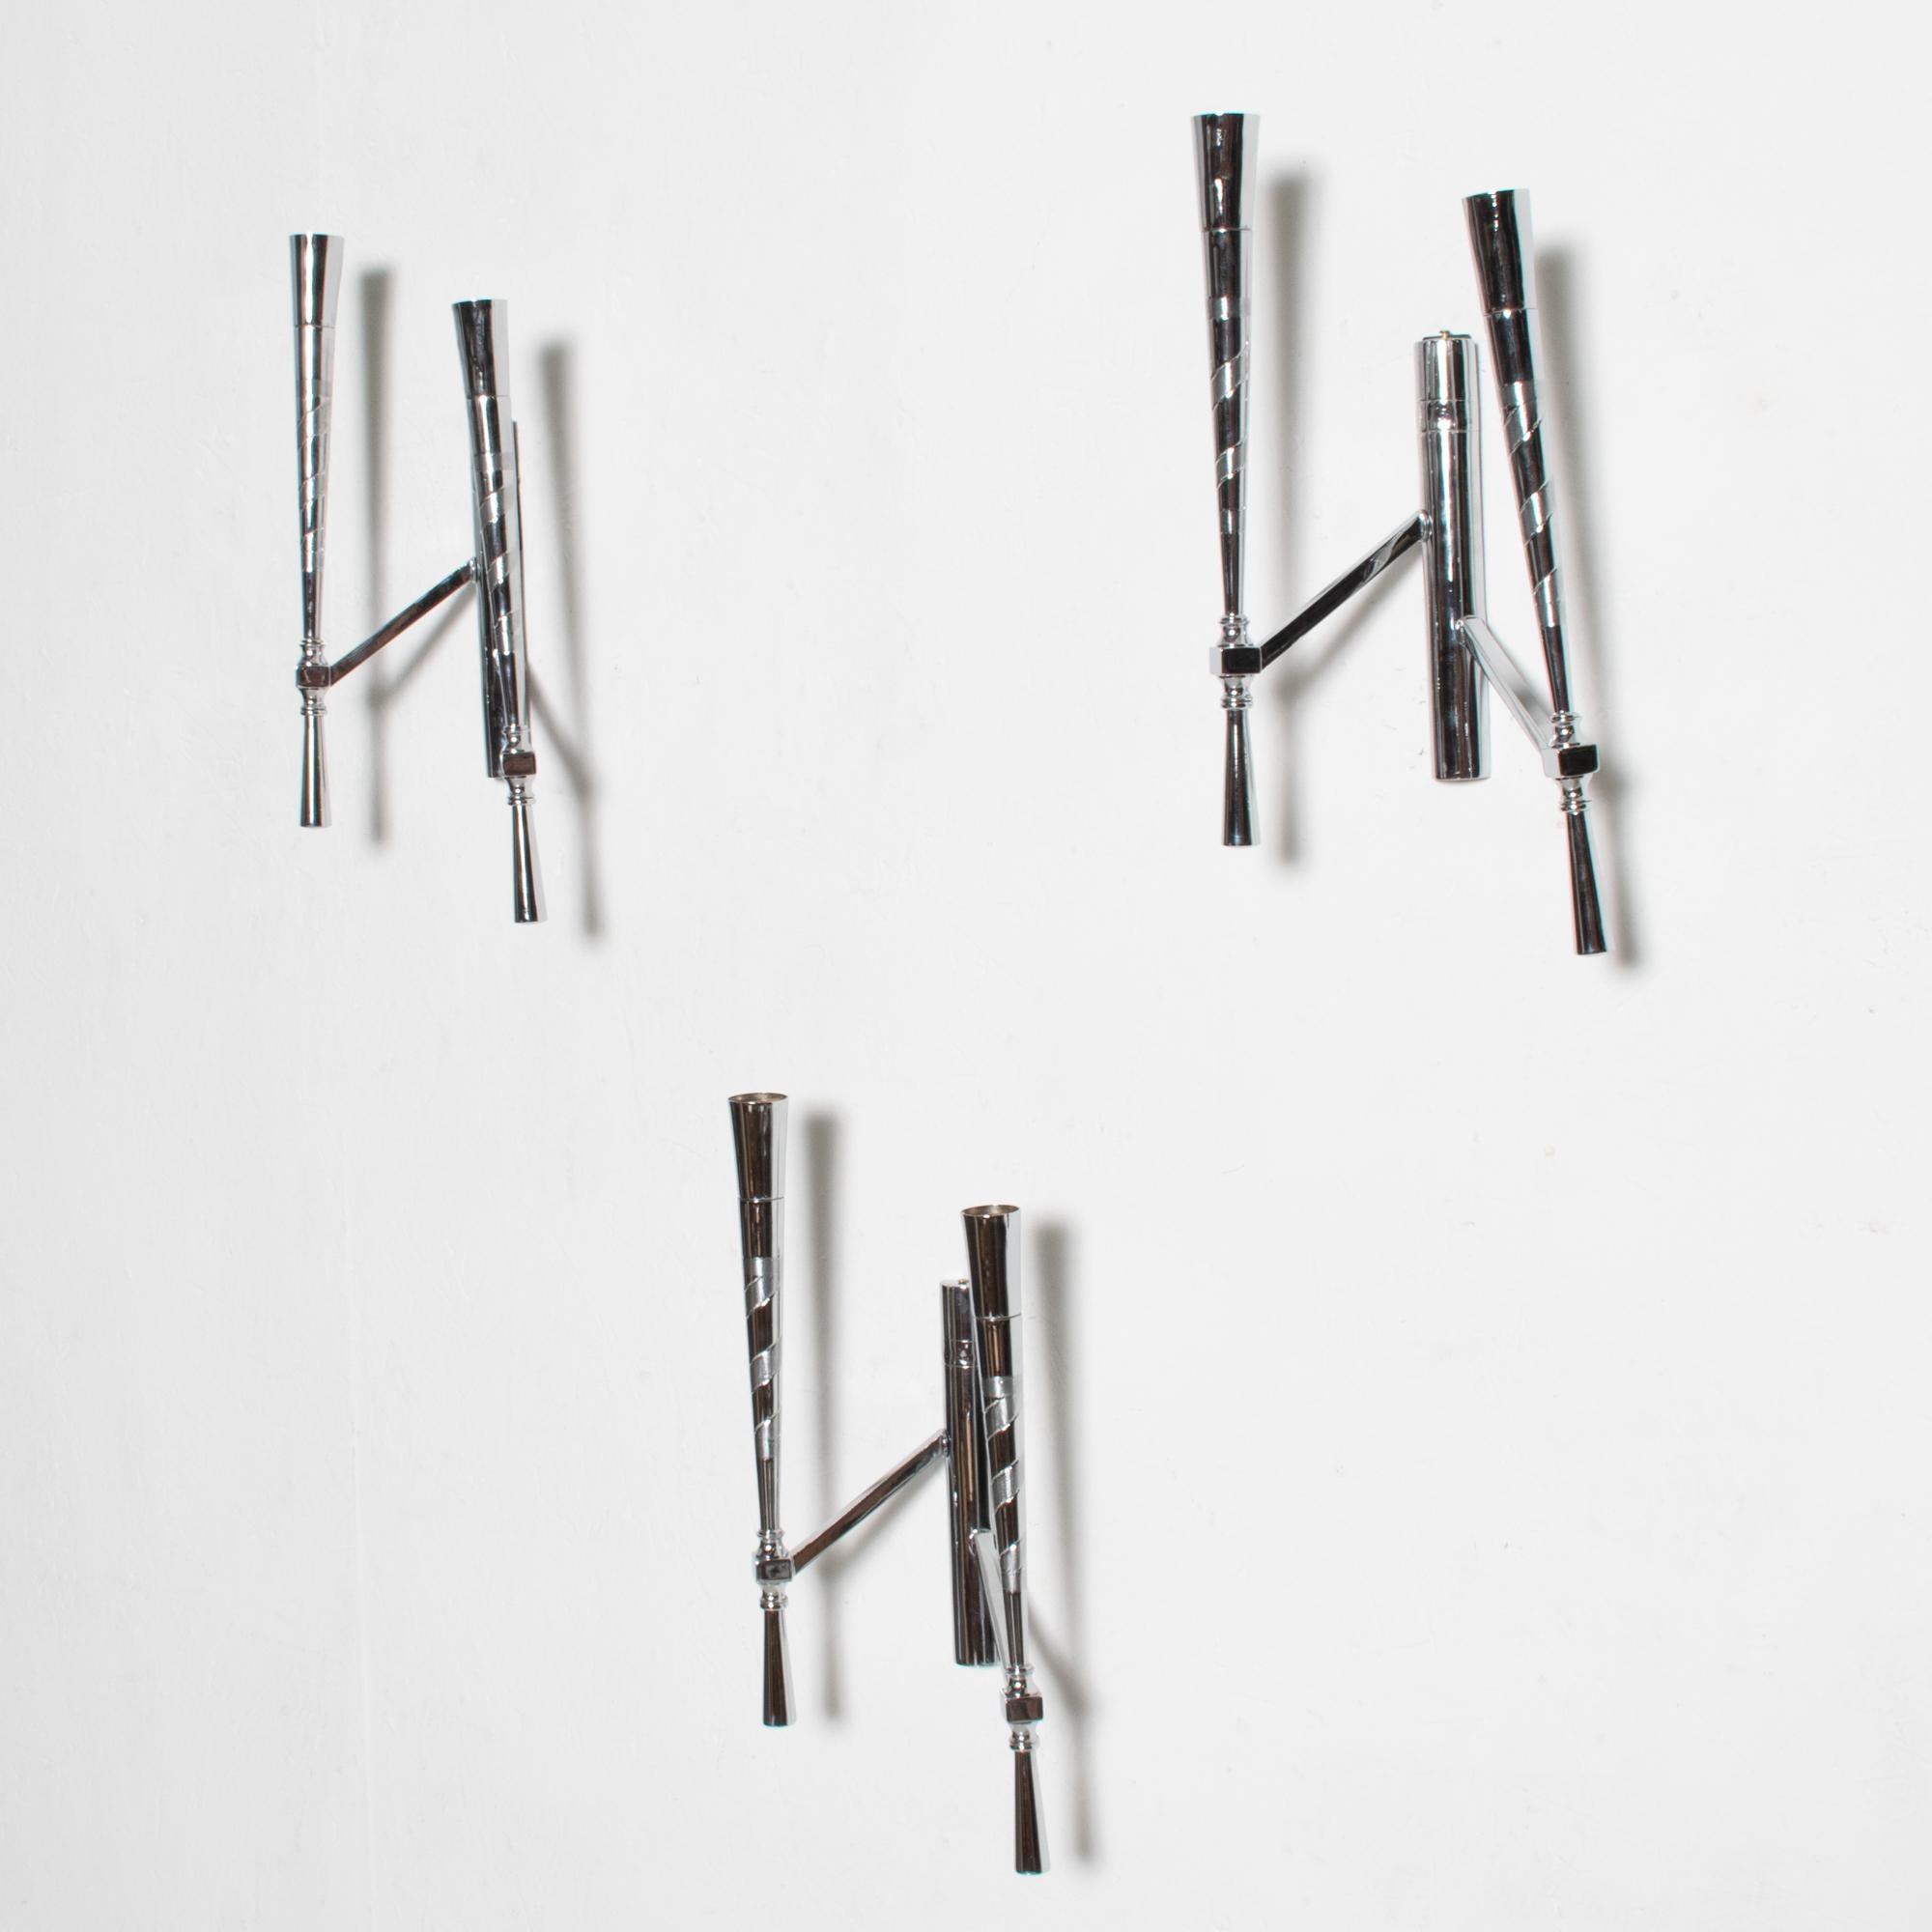 
Modern Milan 1950s Three Wall Sconces attributed to designer Guglielmo Ulrich manner of Gaetano Sciolari.
Each sconce has 2 arms. Chrome plated.
Made in Italy.
No maker label
Sconces require 2 candelabra bulbs. Bulbs are not included.
15 .5 H x 7.5